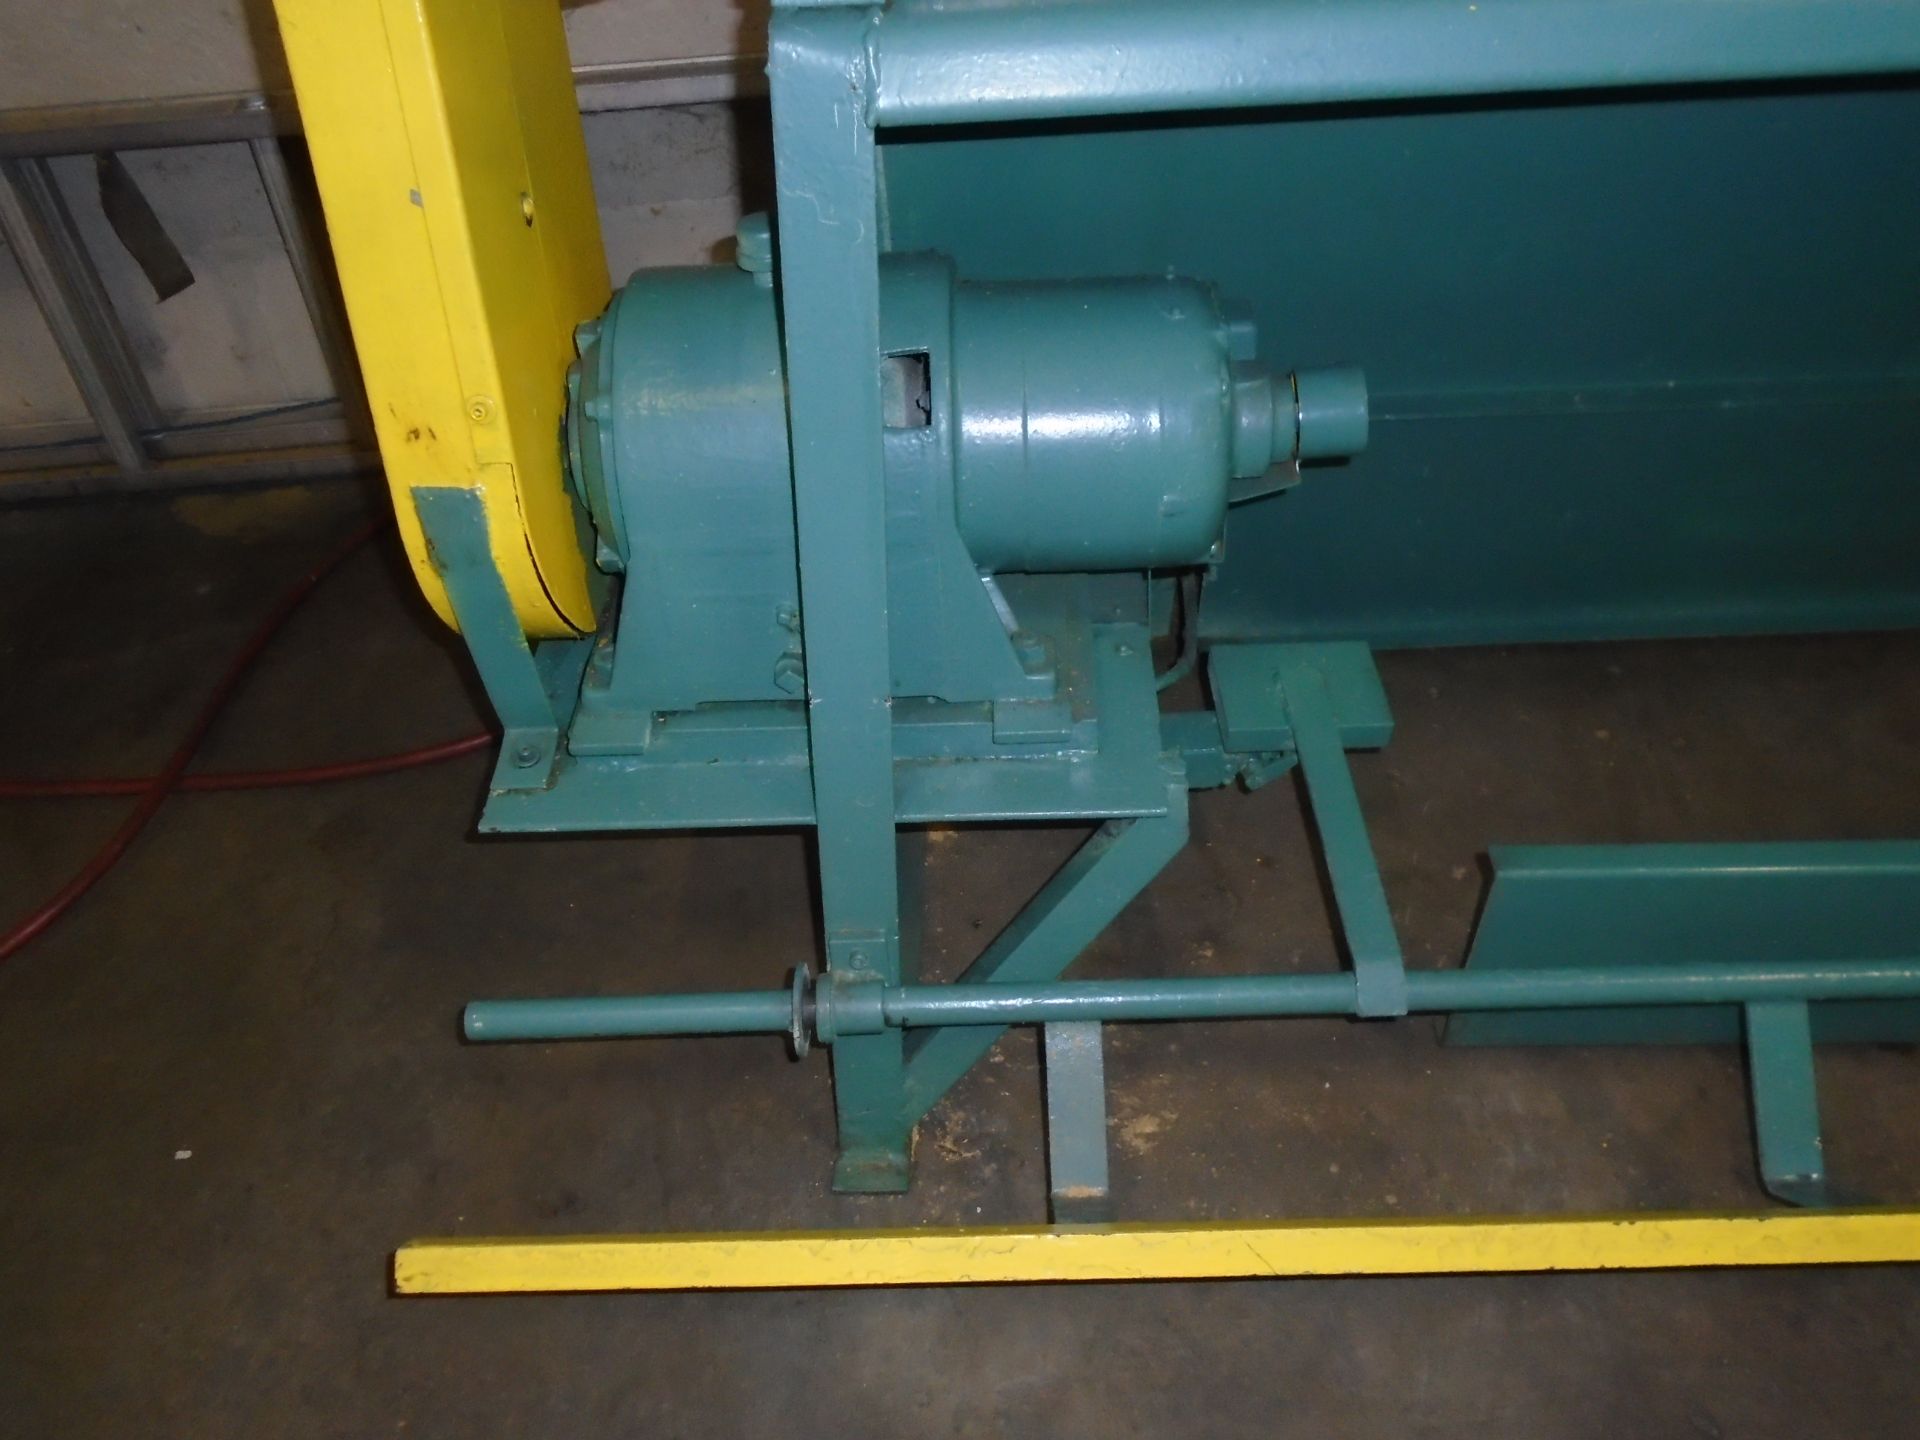 Peck Stow & Wilcox Co Power Roll Forming Machine 20 Gage Capacity 3” x 36” Model 392-E SN: 6/53 - Image 5 of 10